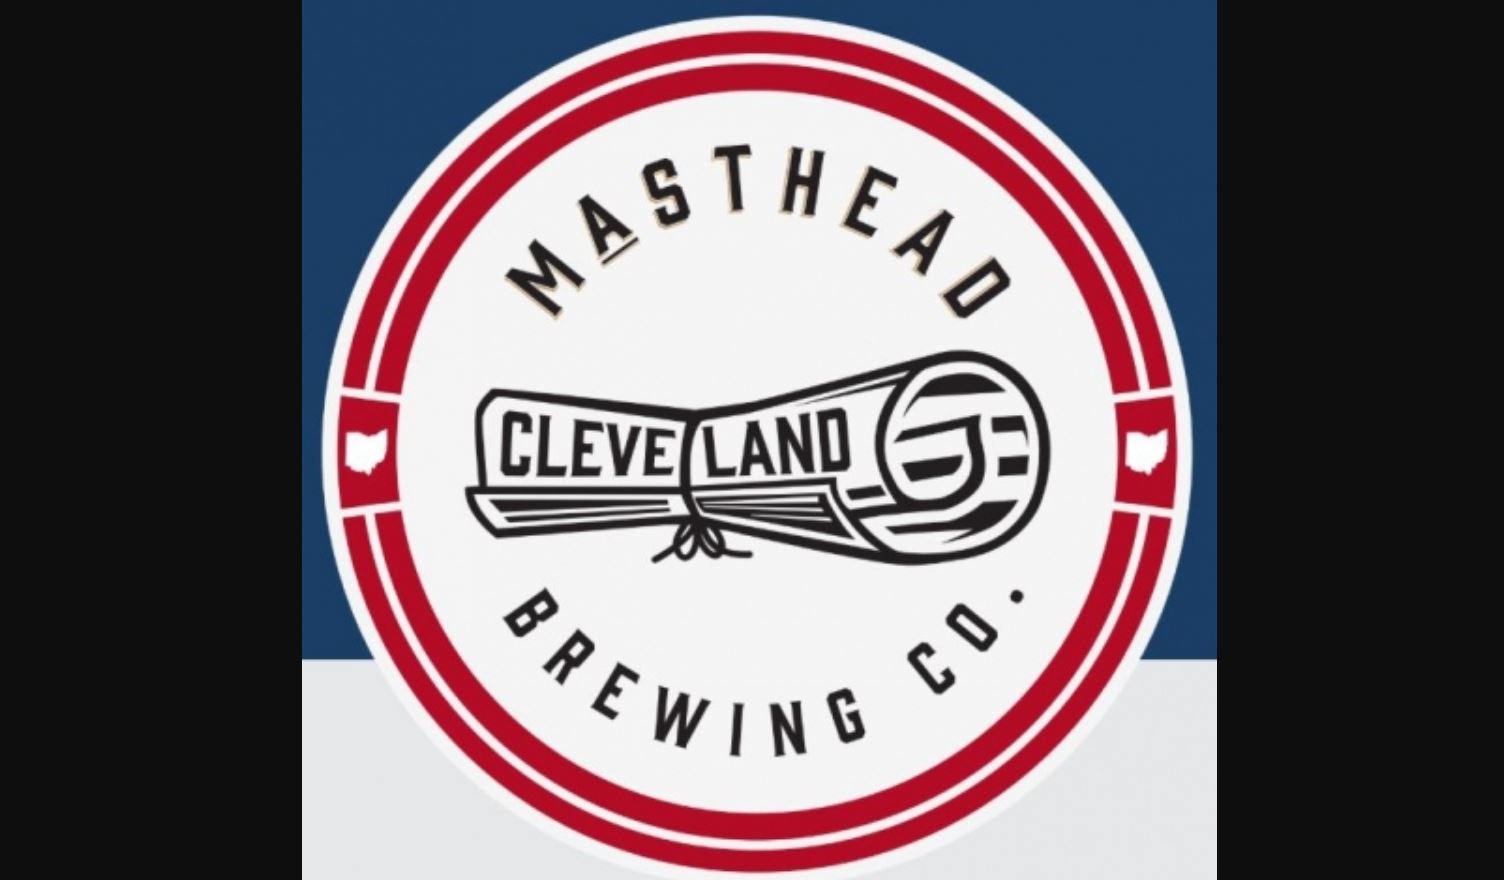 Masthead Midwest Red IPA